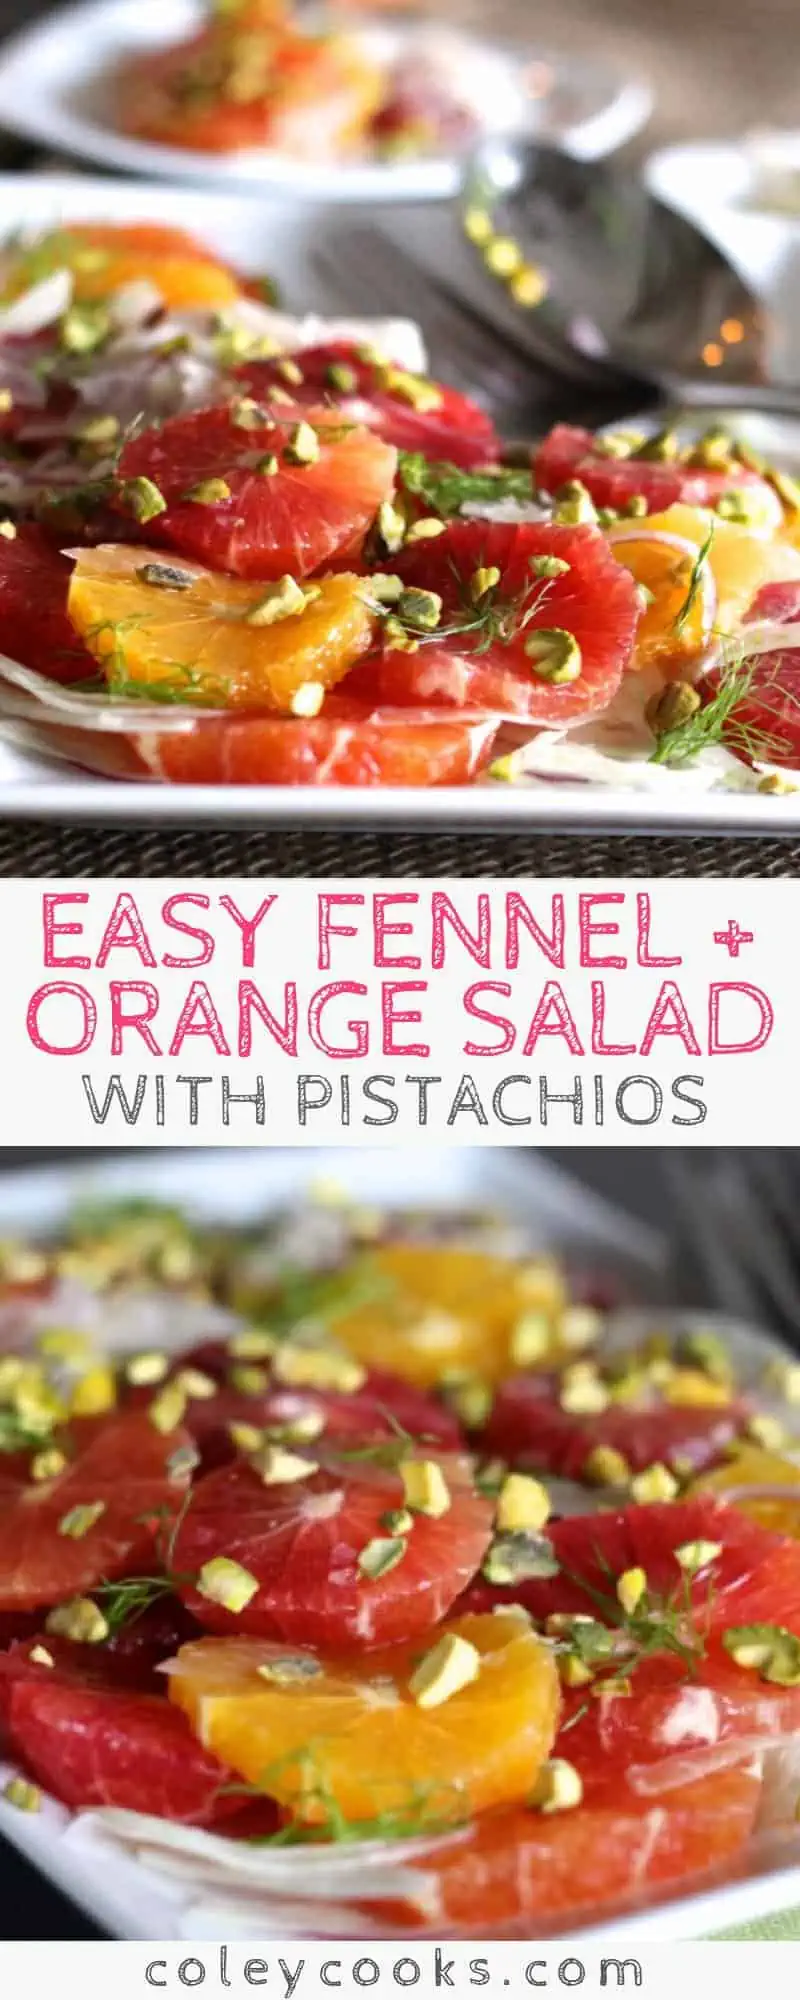 This easy recipe for Fennel + Orange Salad with Pistachios is vegan, gluten free, and perfect for brightening up a winter day! A tangy, refreshing and delicious winter salad. #easy #vegan #salad #recipe #pistachios #orange #citrus | ColeyCooks.com